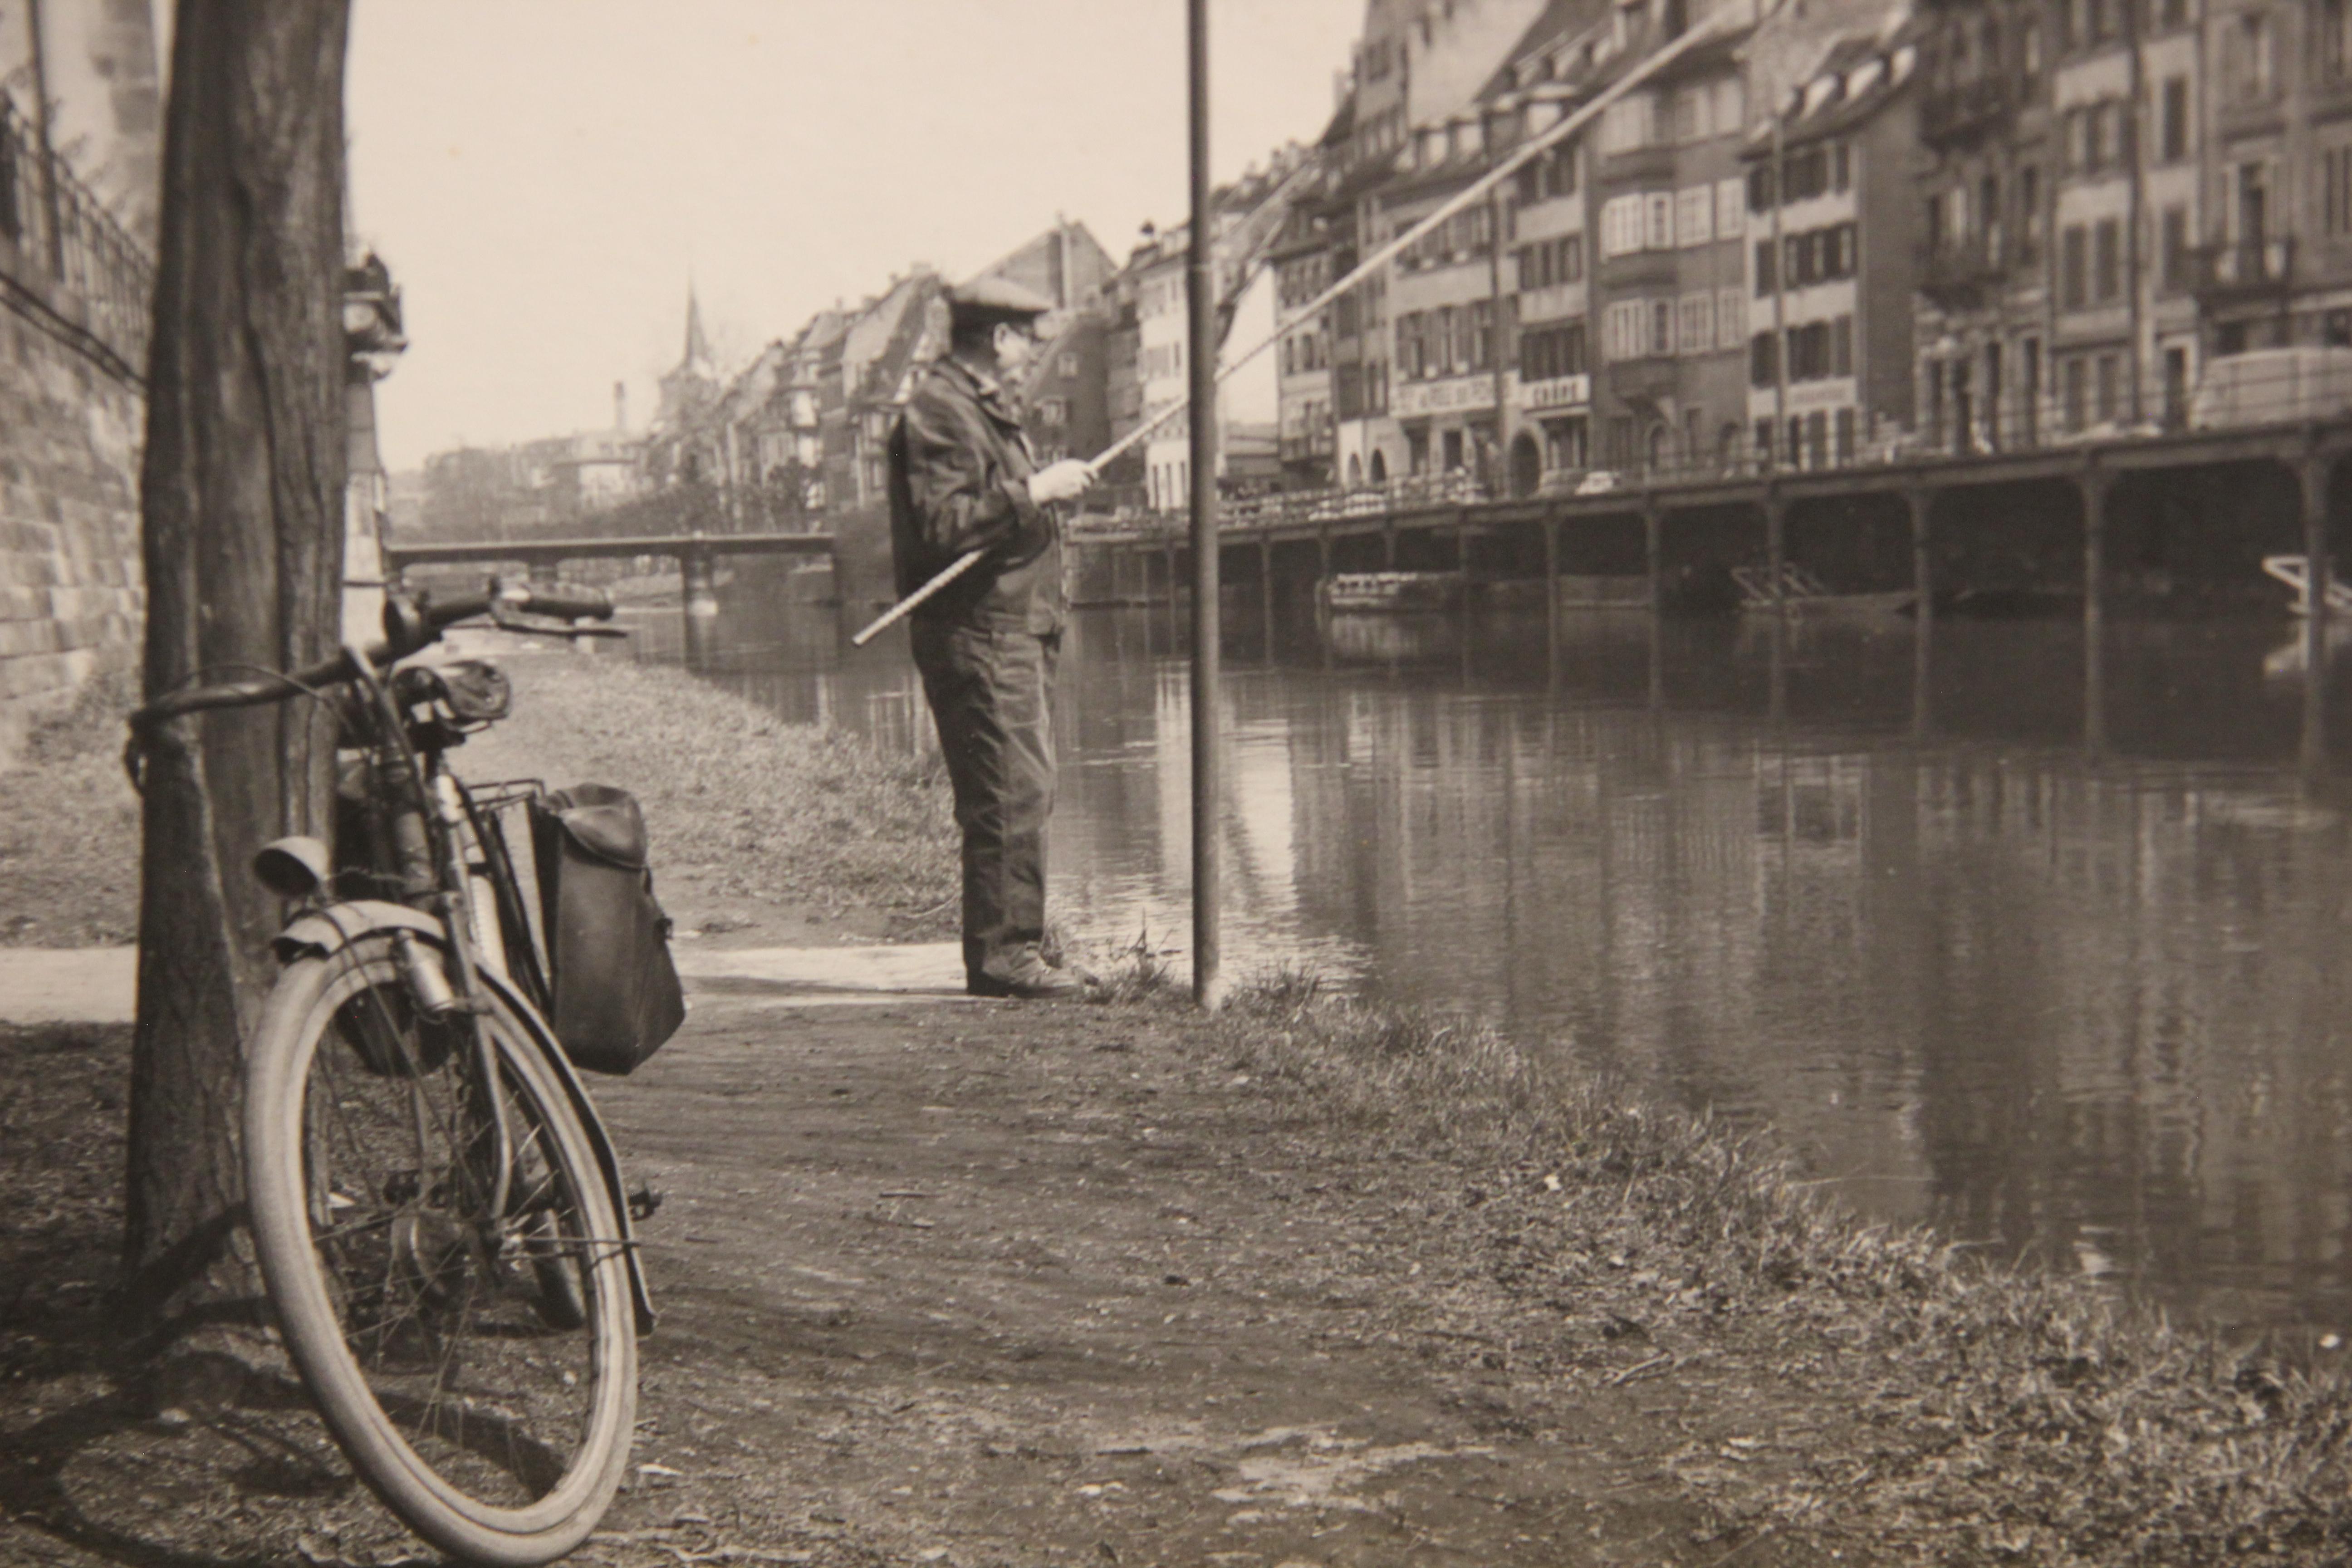 Early black and white photograph of a fisherman fishing in what appears to be a European town setting. The photograph is matted to a board to prevent bending. The photograph is not framed.
 